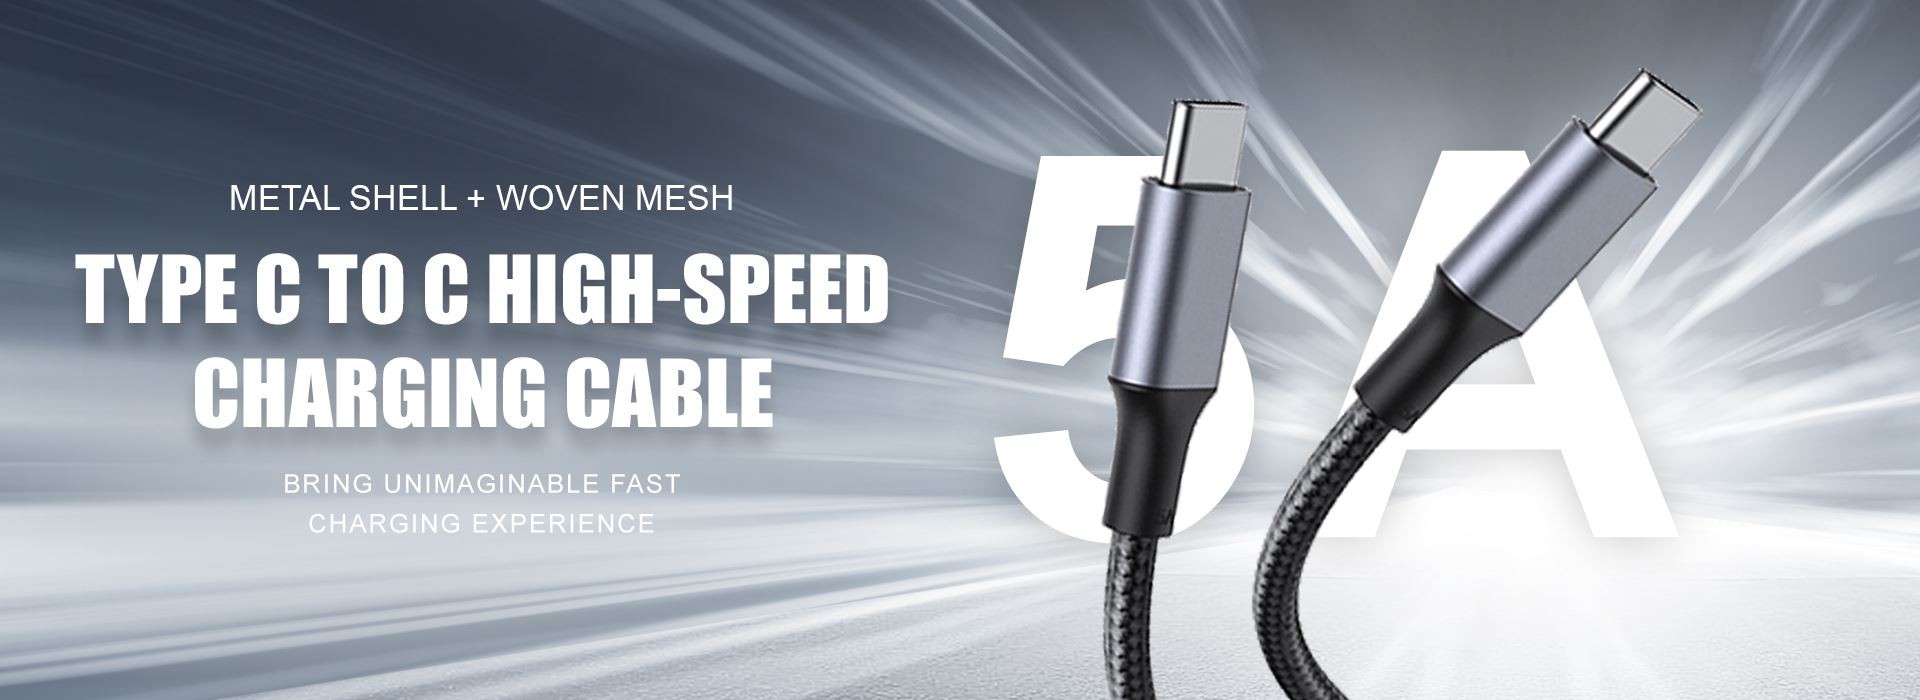 TYPE C TO C HIGH-SPEED CHARGING CABLE